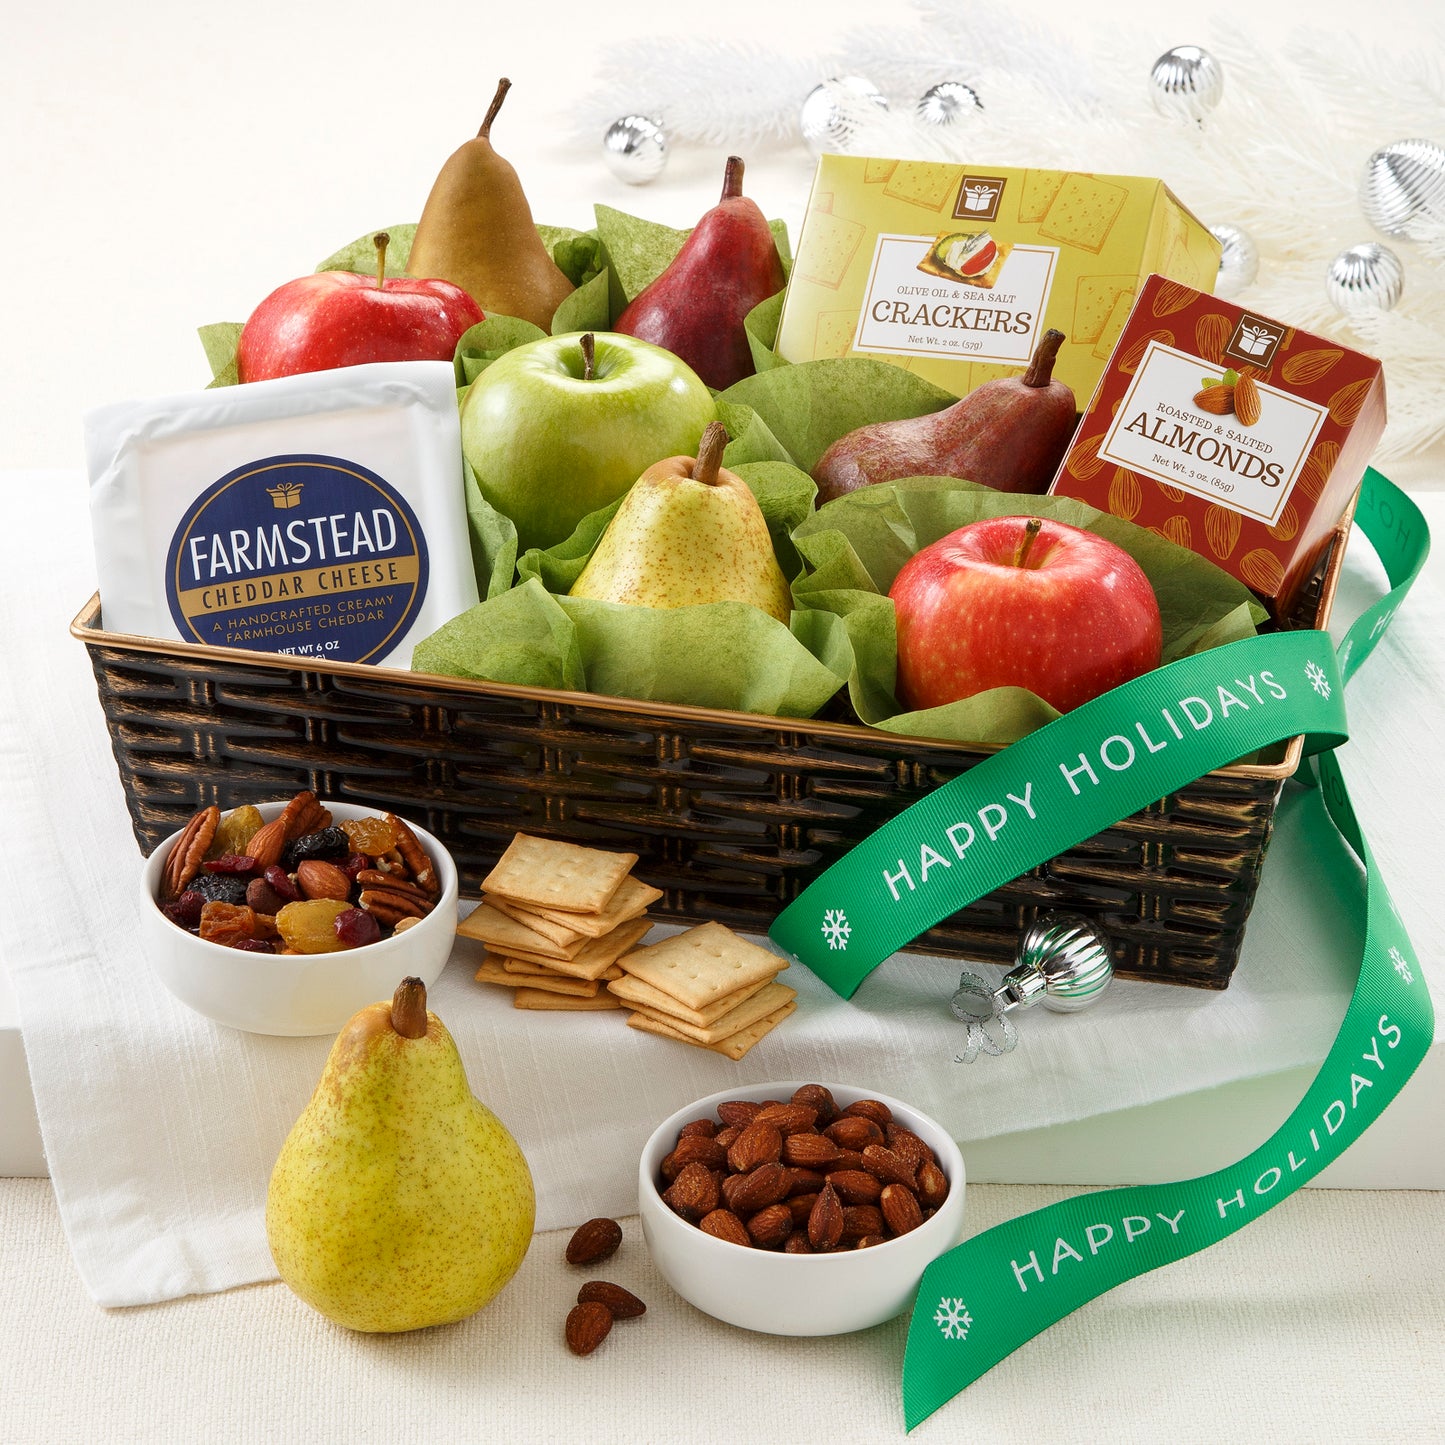 A brown basket filled with an assortment of fruit, nuts, cheese, and crackers.